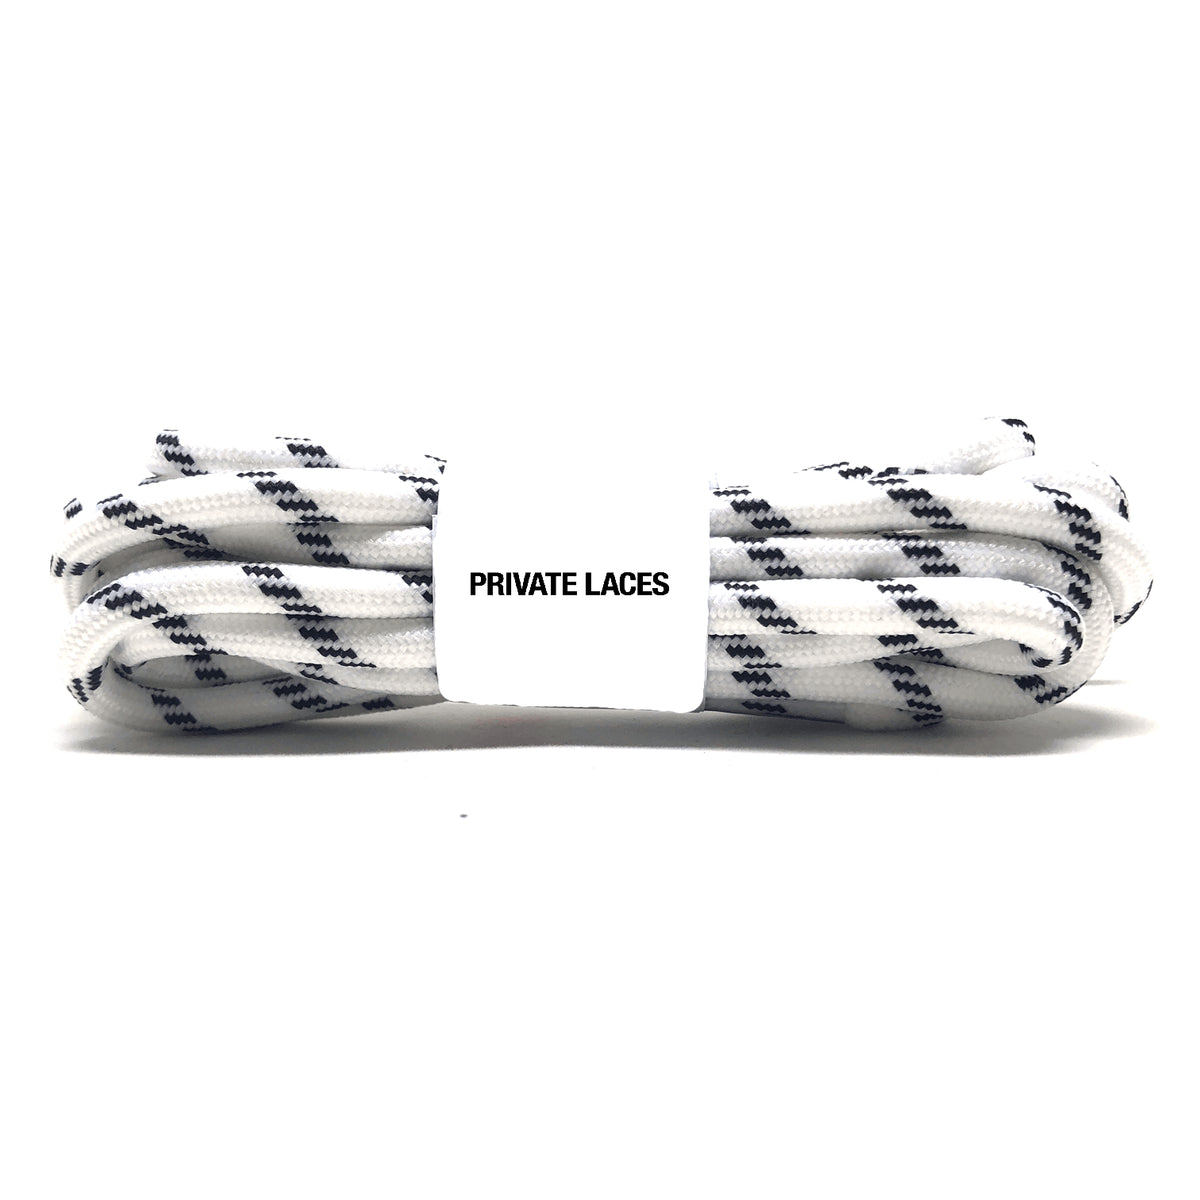 Private Laces Replacement Shoelaces for Christian Louboutin Sneakers